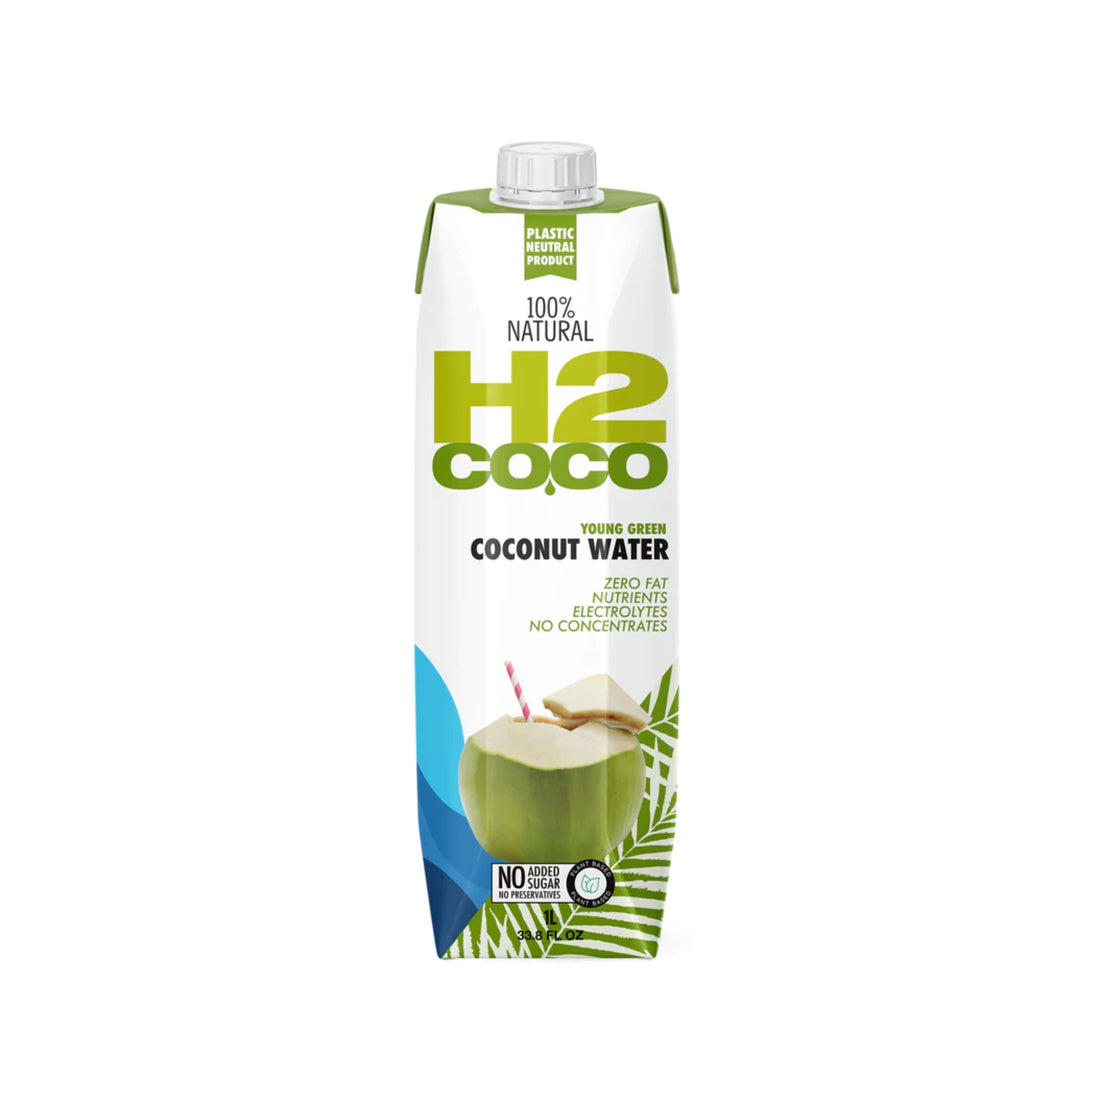 H2 Coco Coconut Water